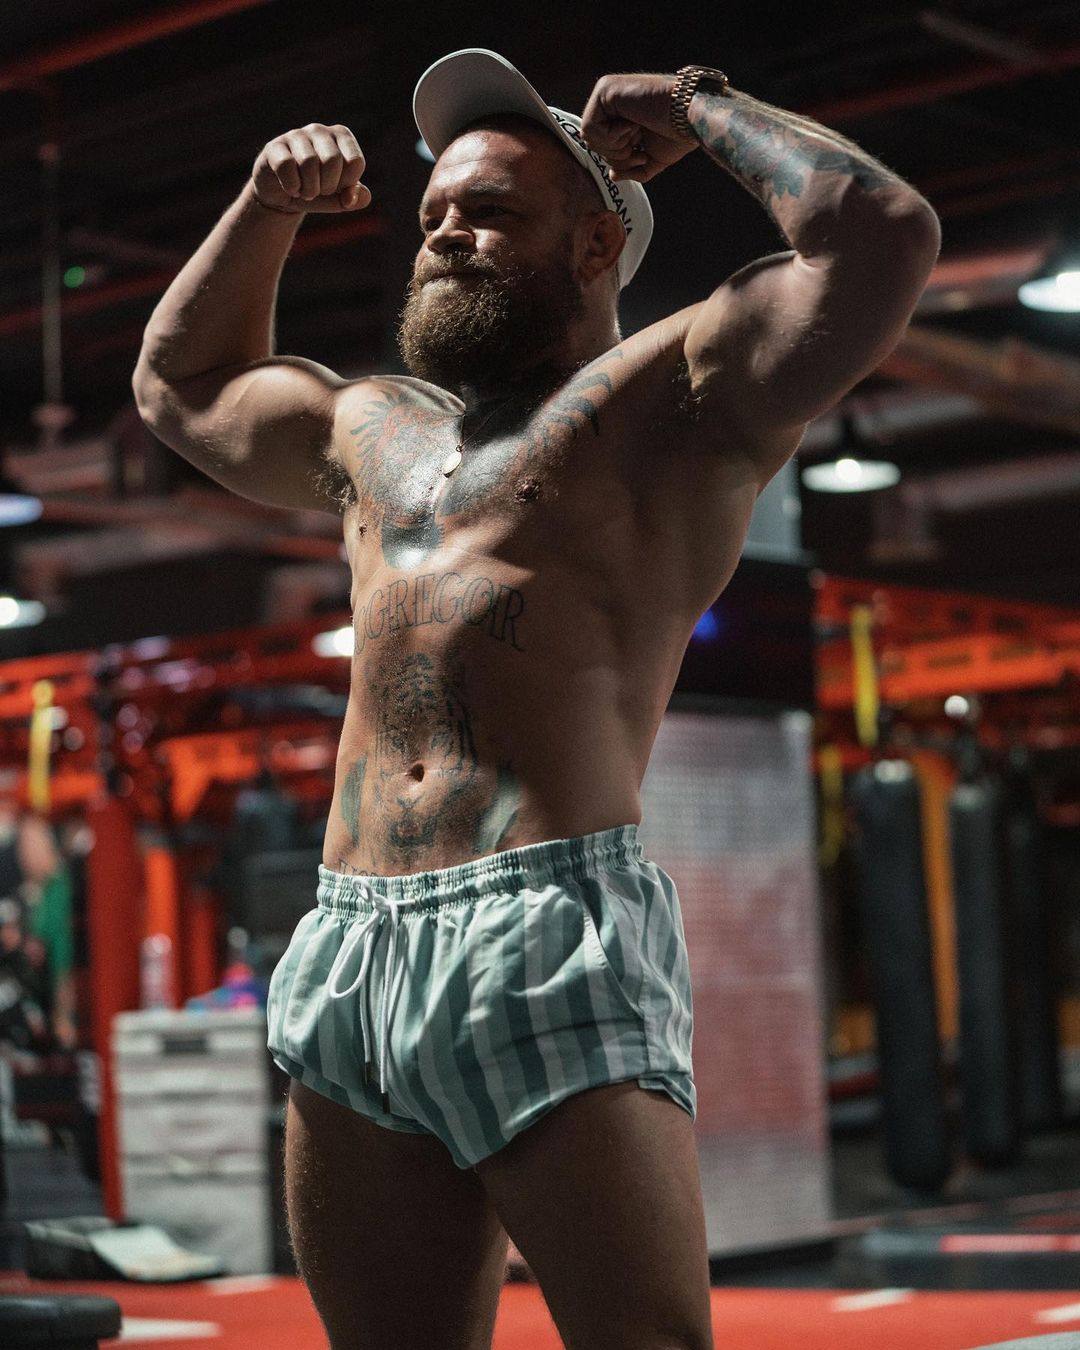 Conor McGregor shows off his muscle gain. Photo: Instagram/@thenotoriousmma